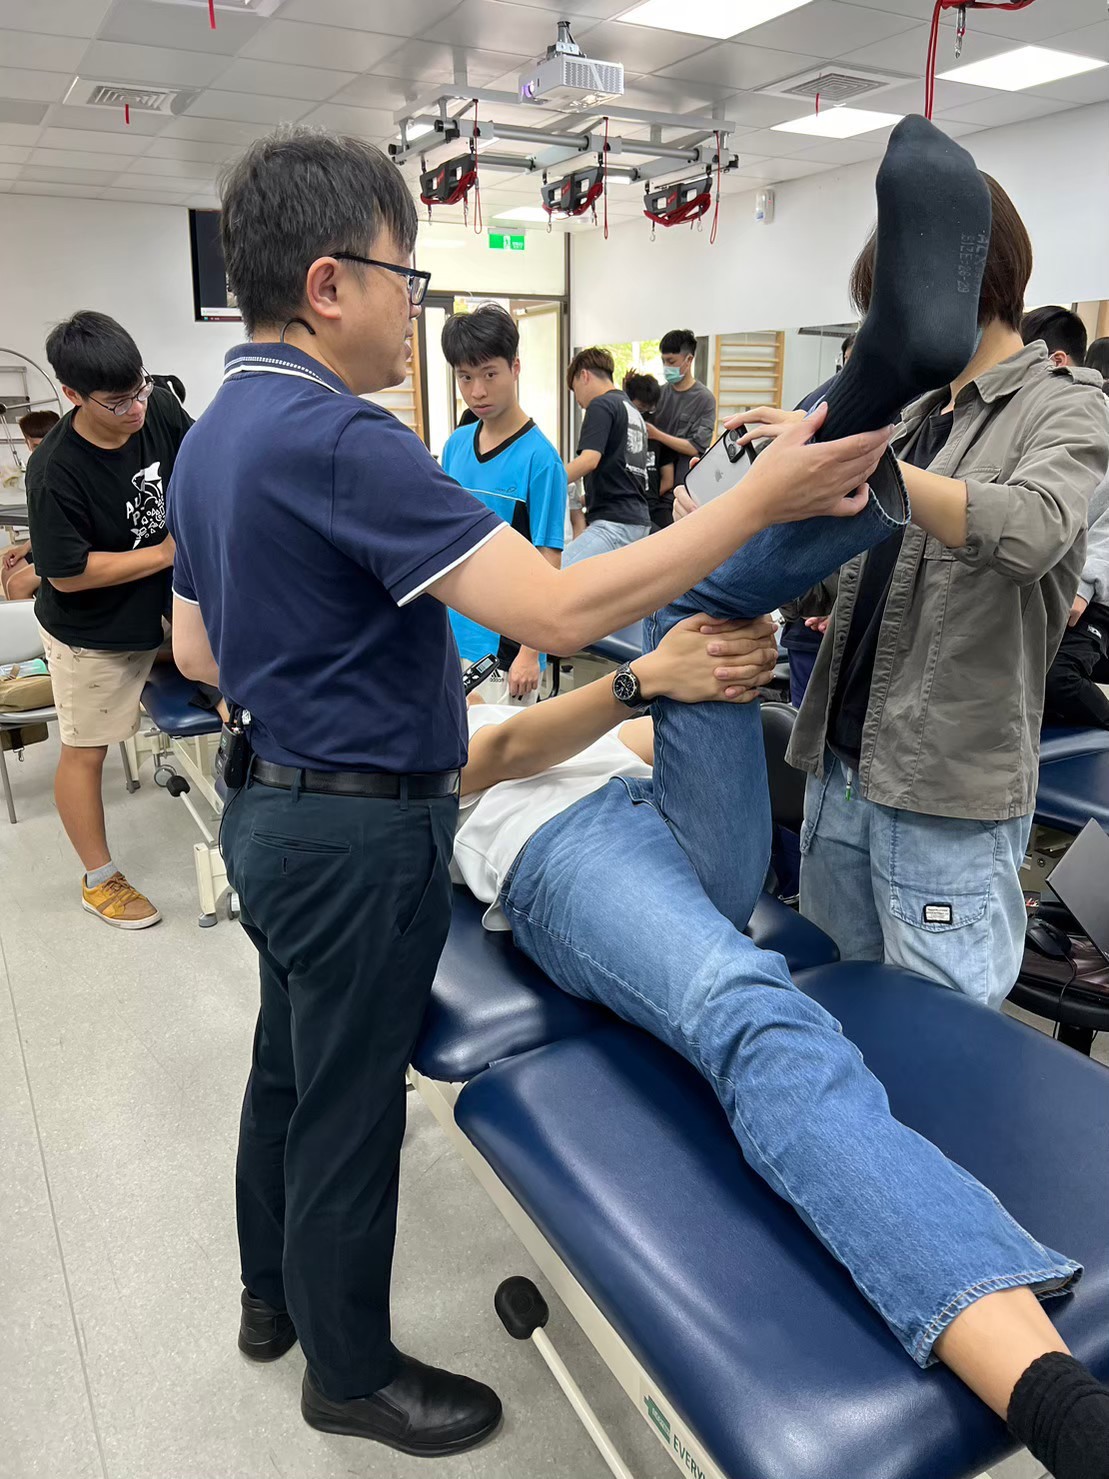 The first graduates from the Department of Physical Therapy of Asia University achieved a high pass rate in the physical therapist licensing examination. The image shows mentors guiding students through the process of physical therapy procedures